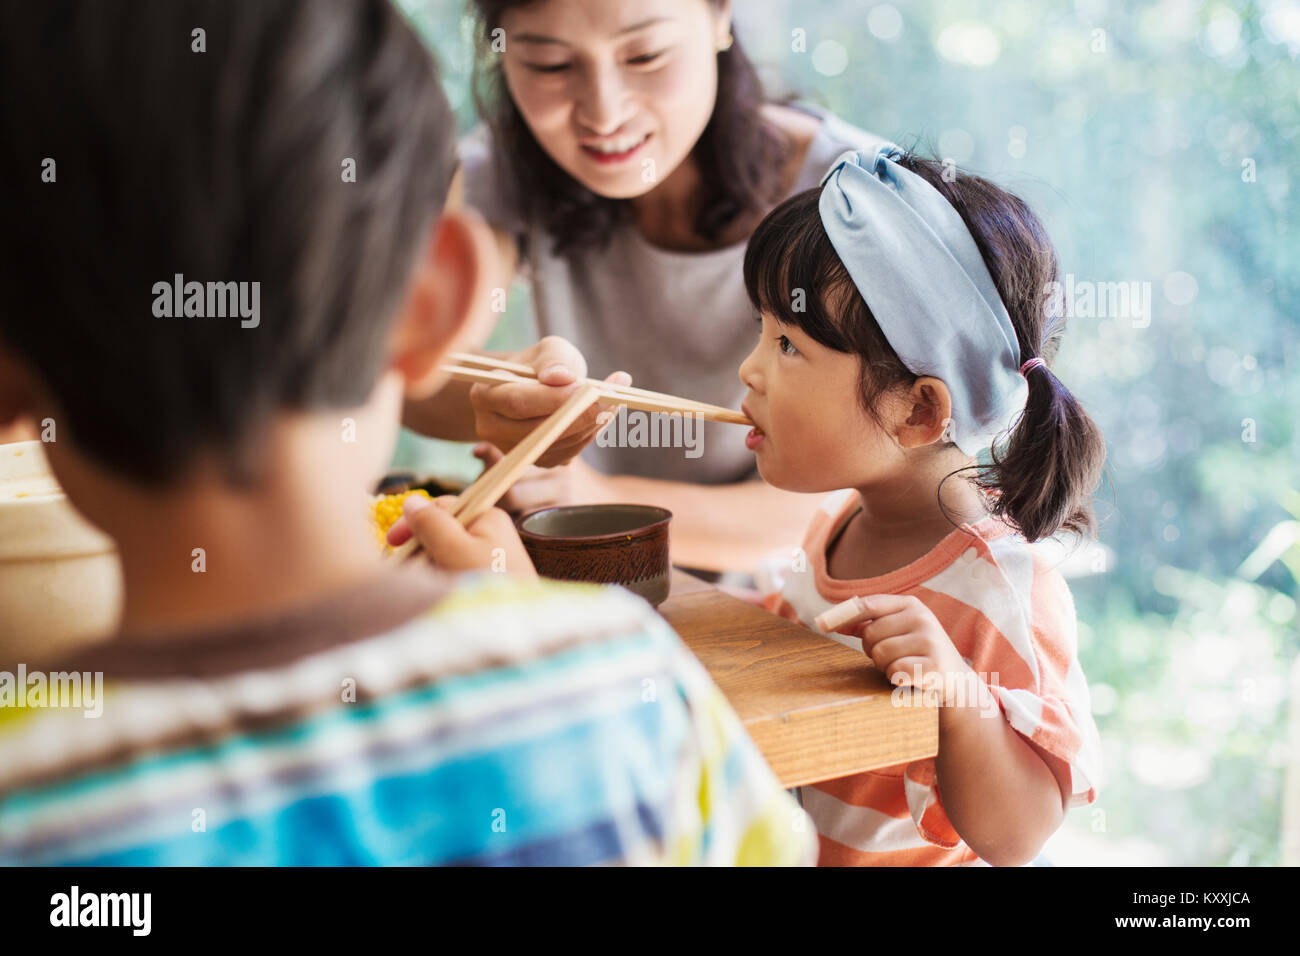 Young girl with black pigtails and blue hairband, boy and woman sitting at a table. Stock Photo